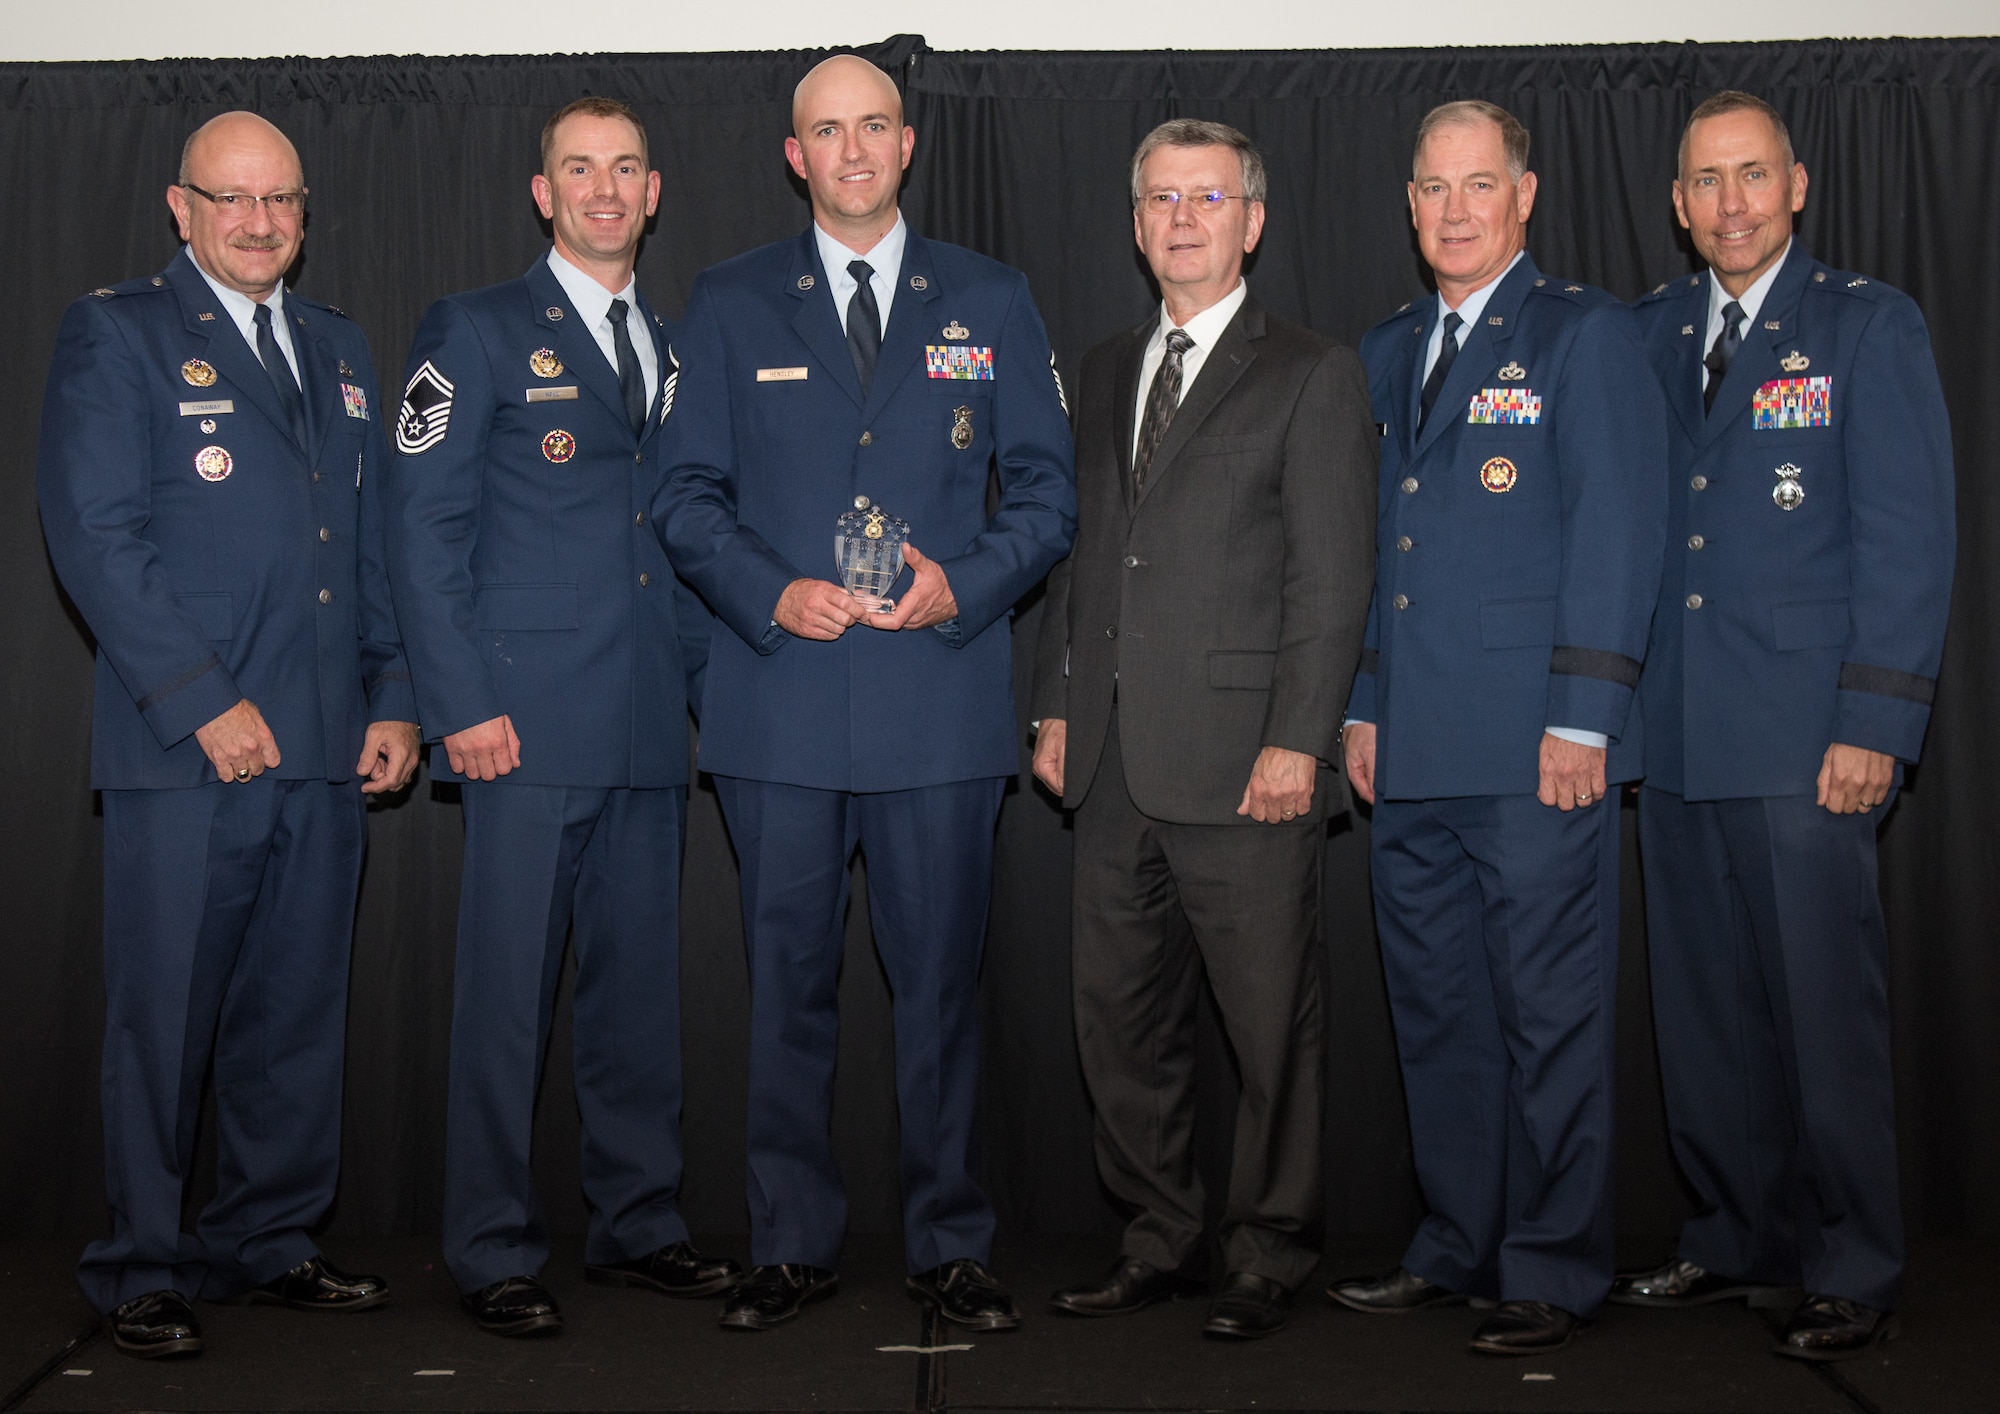 Master Sgt. Michael Hensley, 129th Security Forces Squadron, Moffett Field, California, receives the Air National Guard Outstanding Air Reserve Component Security Forces Noncommisioned Officer of 2017 Award at the 2018 Air National Guard Security Forces Squadron Dinner and Awards Banquet at the National Center for Employee Development Conference Center in Norman, Oklahoma, Sept. 12, 2018. Every year, leadership from all of the Air National Guard security forces squadrons meet in one place to discuss past, current and upcoming topics that impact the career field, as well as recognize outstanding security forces Airmen. (U.S. Air National Guard Photo by Staff Sgt. Kasey M. Phipps)